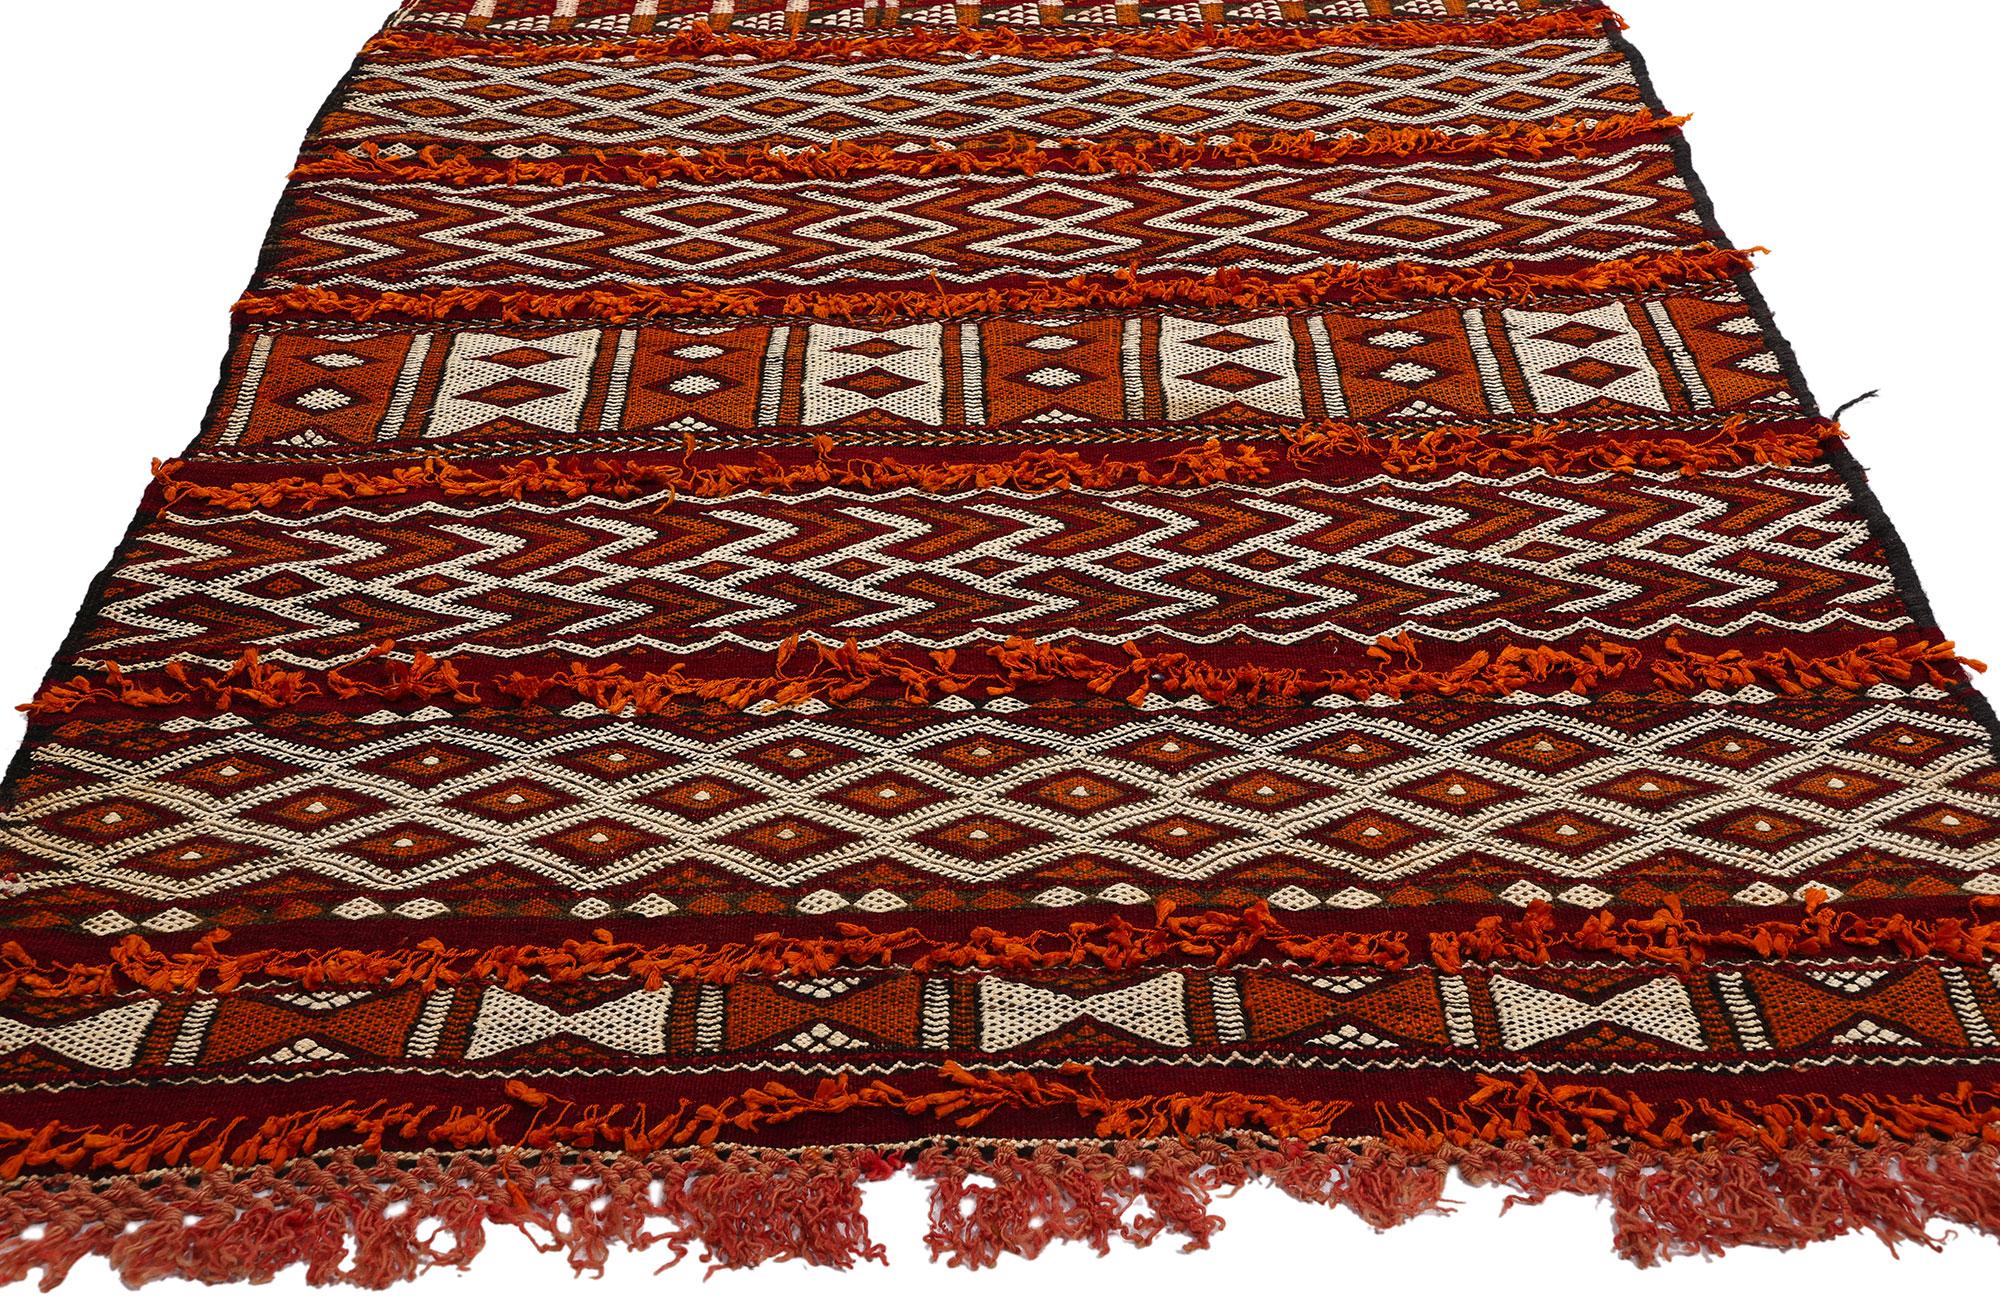 21772 Vintage Moroccan Zemmour Kilim Rug, 03'02 x 23'02. Introducing an exceptional vintage Moroccan kilim rug runner, meticulously handwoven with extra-long dimensions by the skilled artisans of the Zemmour Tribe, nestled in the idyllic Middle